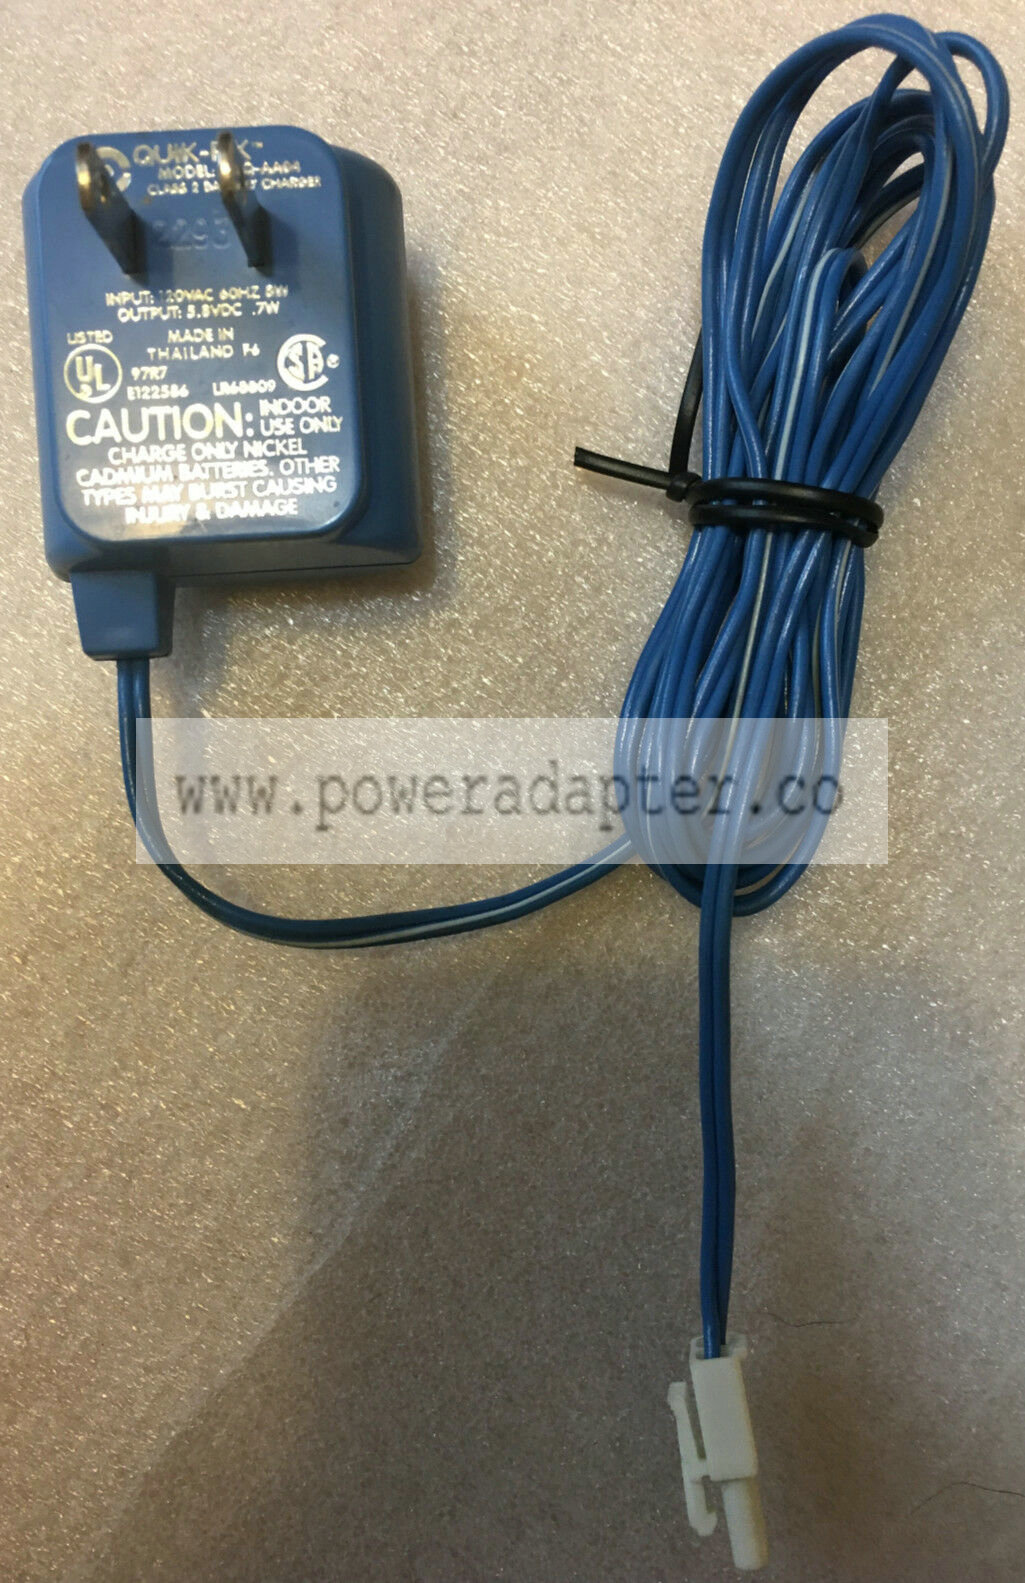 Nikko 1247 Power Supply Adapter Charger Output 5.8VDC NCQ-AA04 *FAST SHIPPING* Up for auction is a Nikko 1247 Power